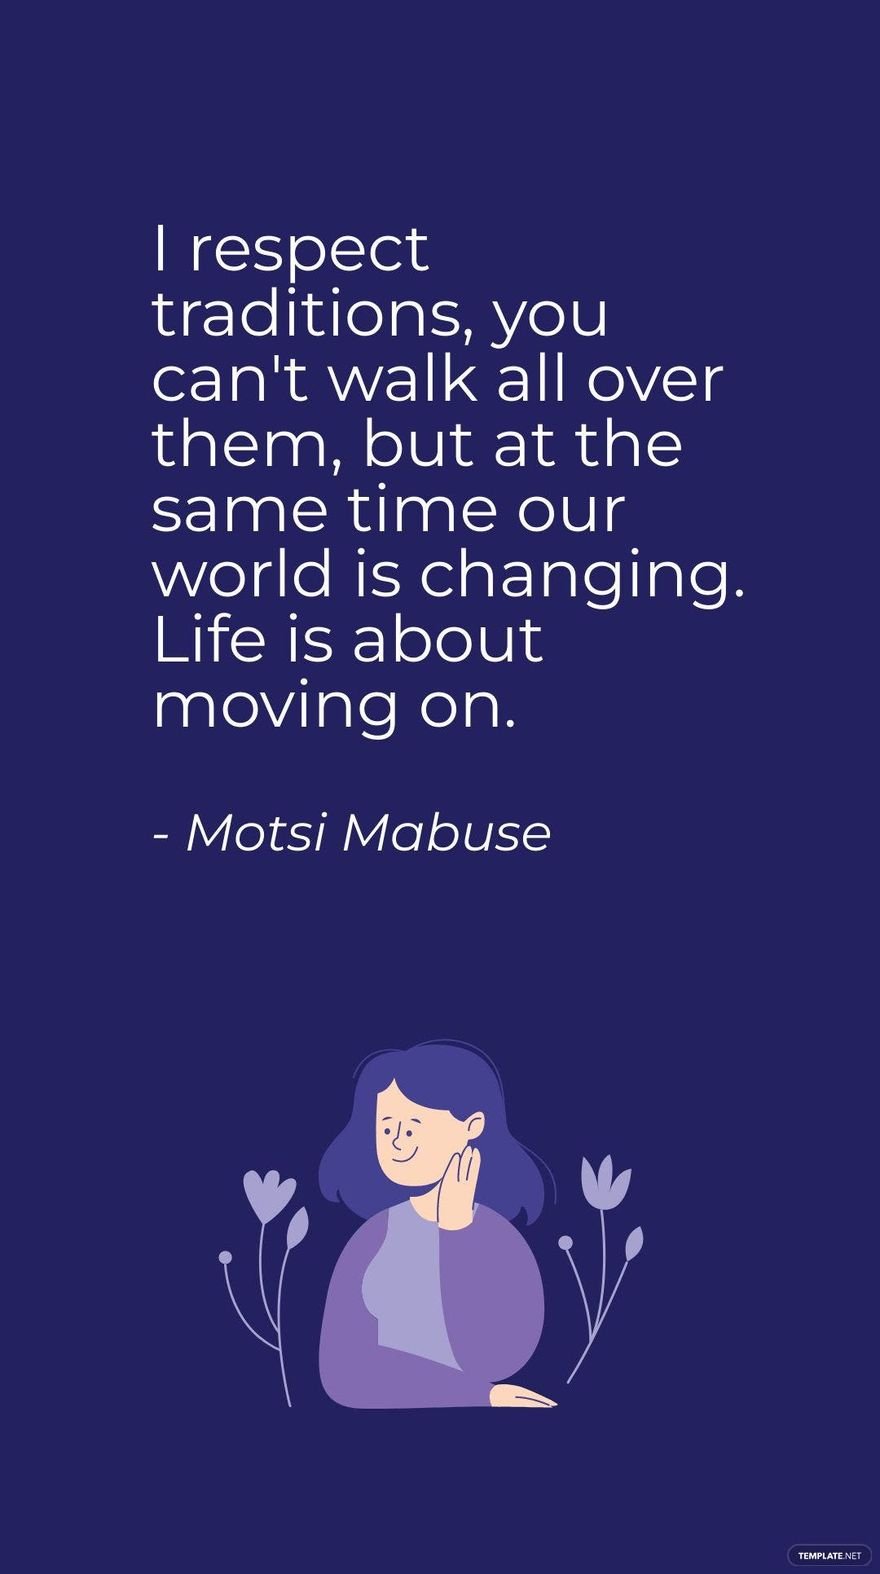 Motsi Mabuse - I respect traditions, you can't walk all over them, but at the same time our world is changing. Life is about moving on.